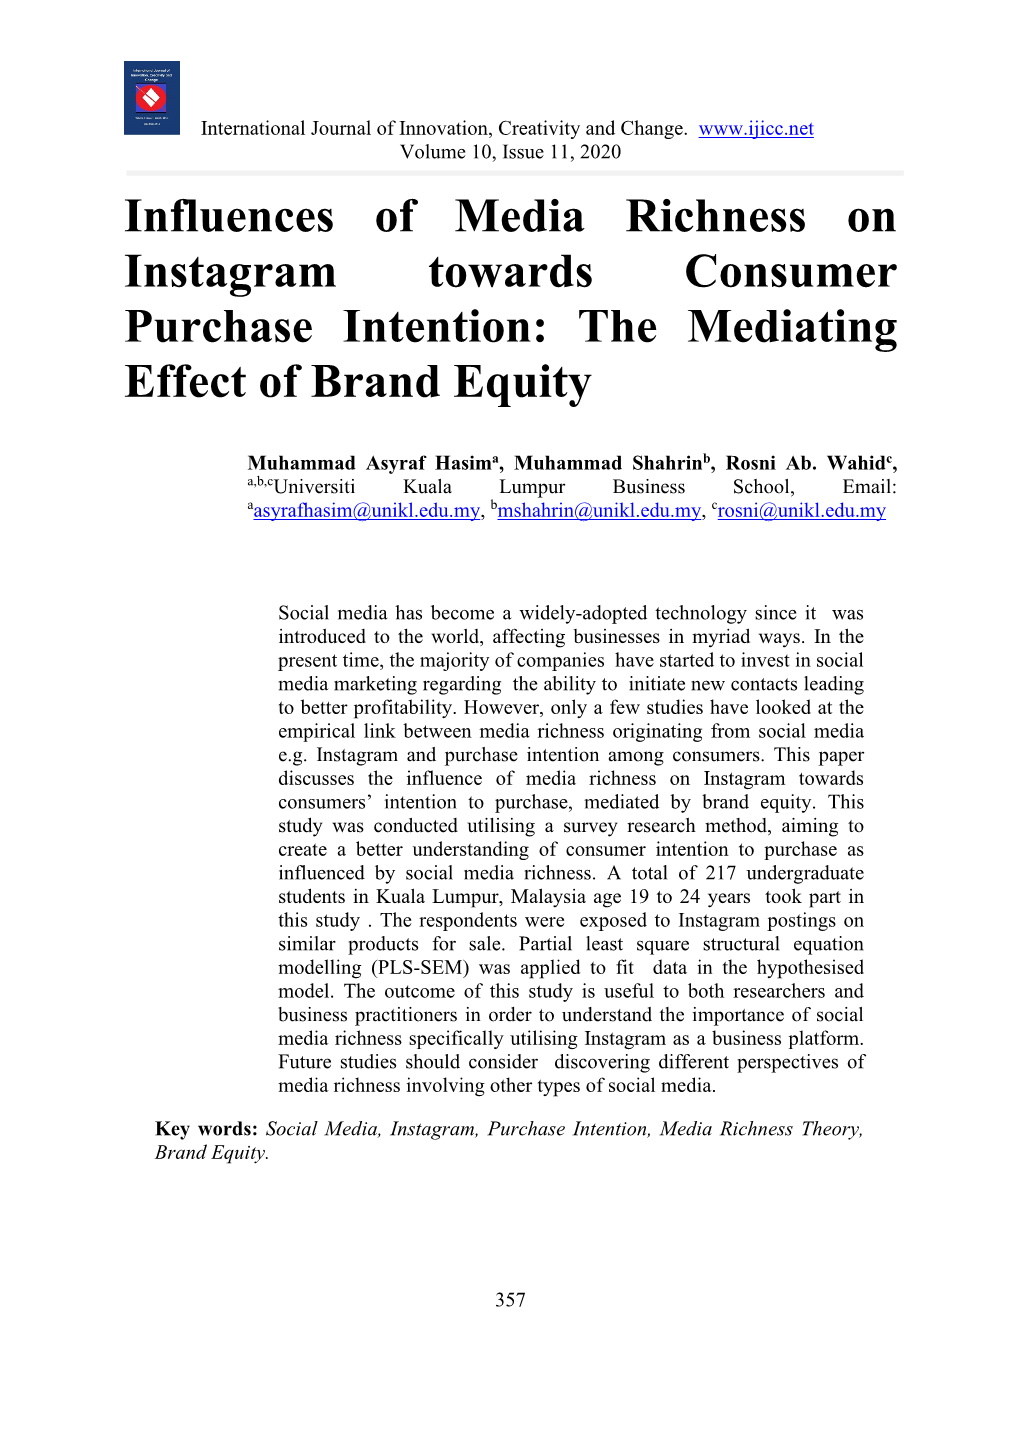 Influences of Media Richness on Instagram Towards Consumer Purchase Intention: the Mediating Effect of Brand Equity